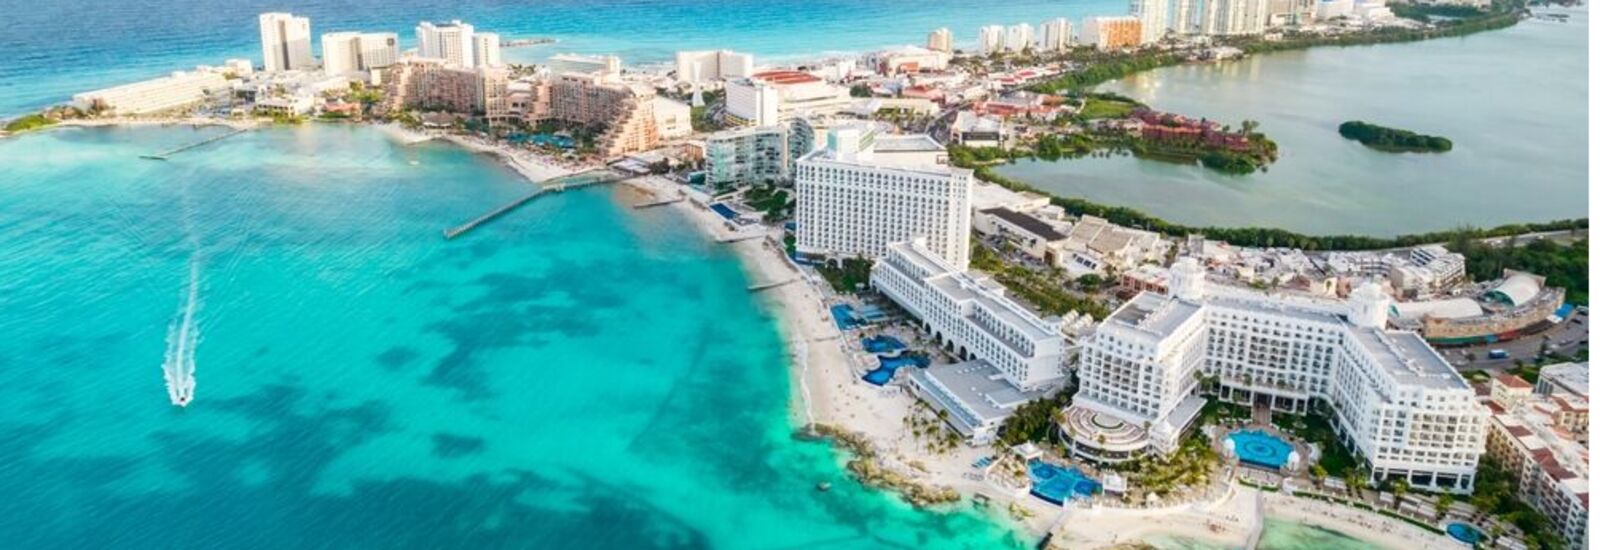 Aerial view of Cancun 